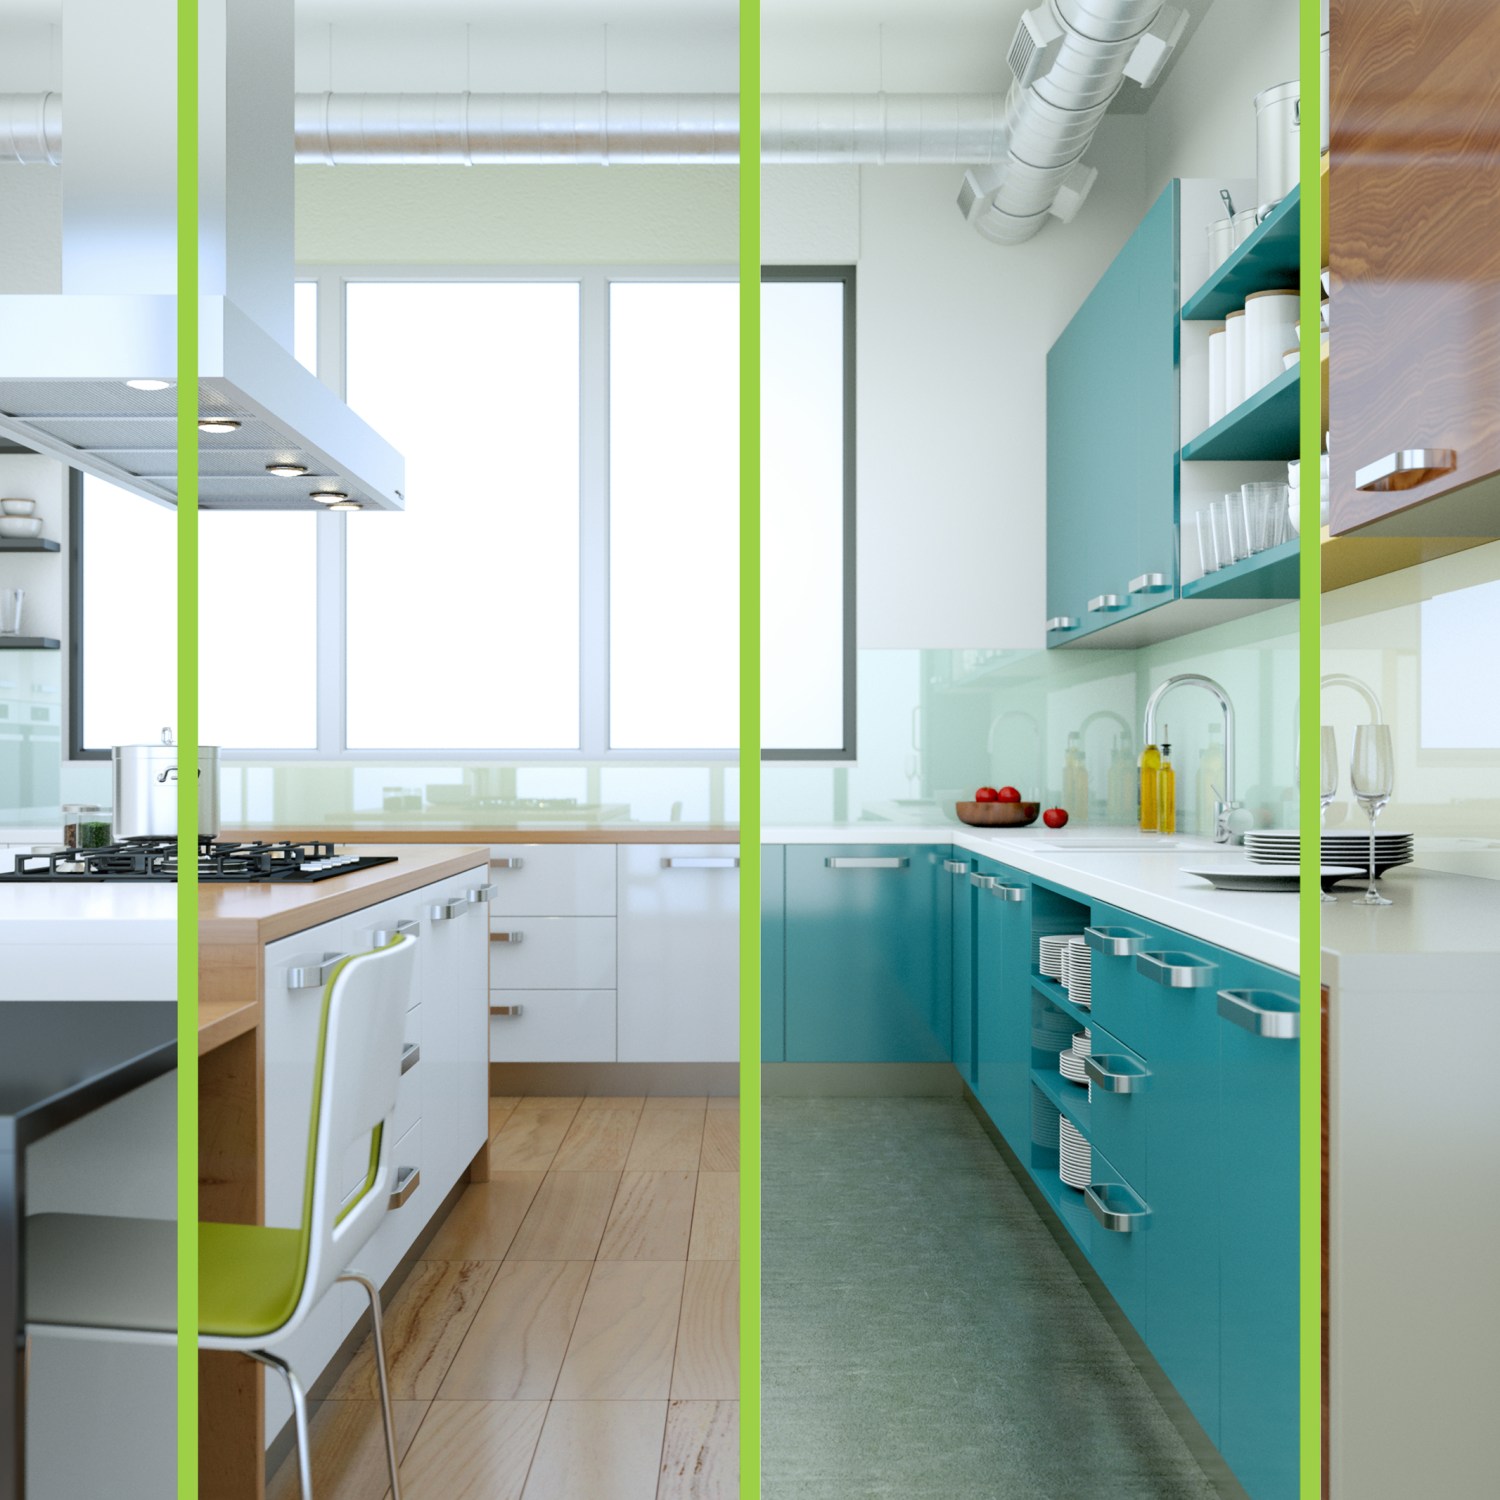 Colorful-kitchen-remodeling-styles-monochrome-green-blue-yellow